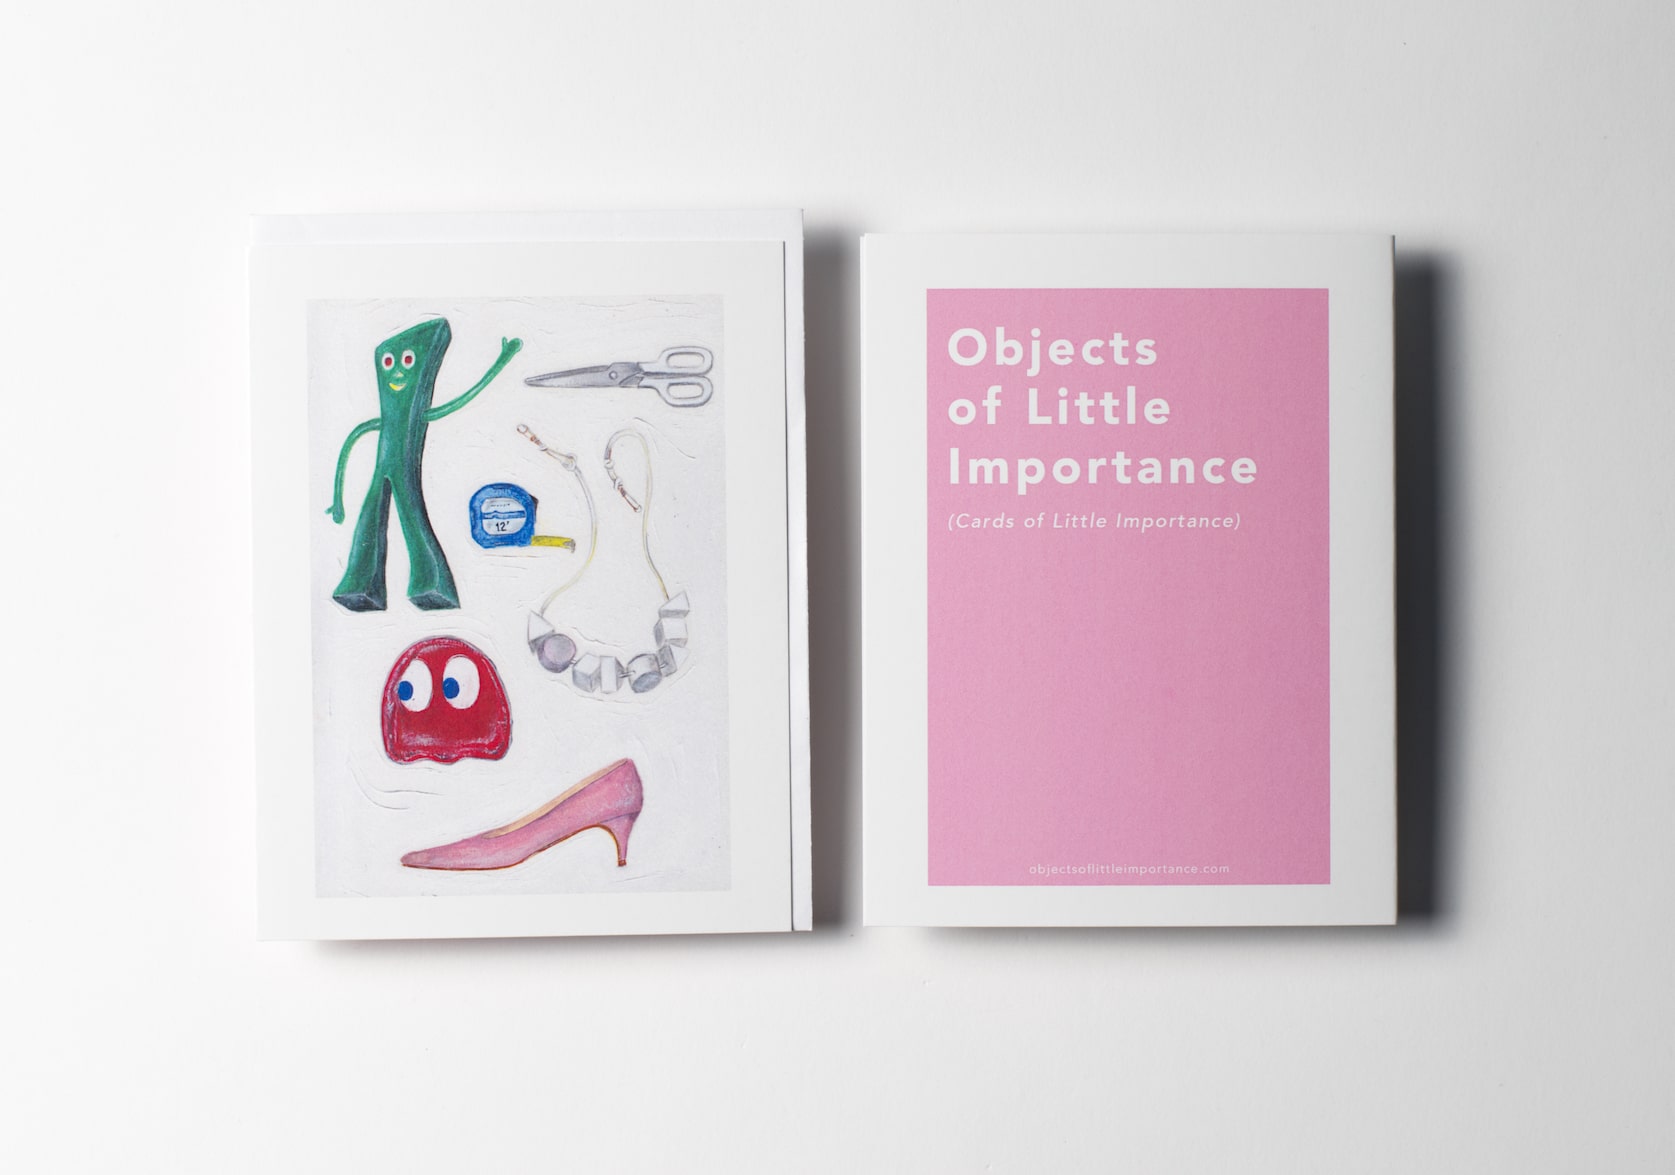 White greeting card featuring a green bendable Gumby figurine, white plastic-handled scissors, a tape measure, a necklace with grey geometric shapes, a red Pac-Man ghost, a pink suede pump. Back of the card is a pink rectangle with white text that reads: Objects of Little Importance (Cards of Little Importance).